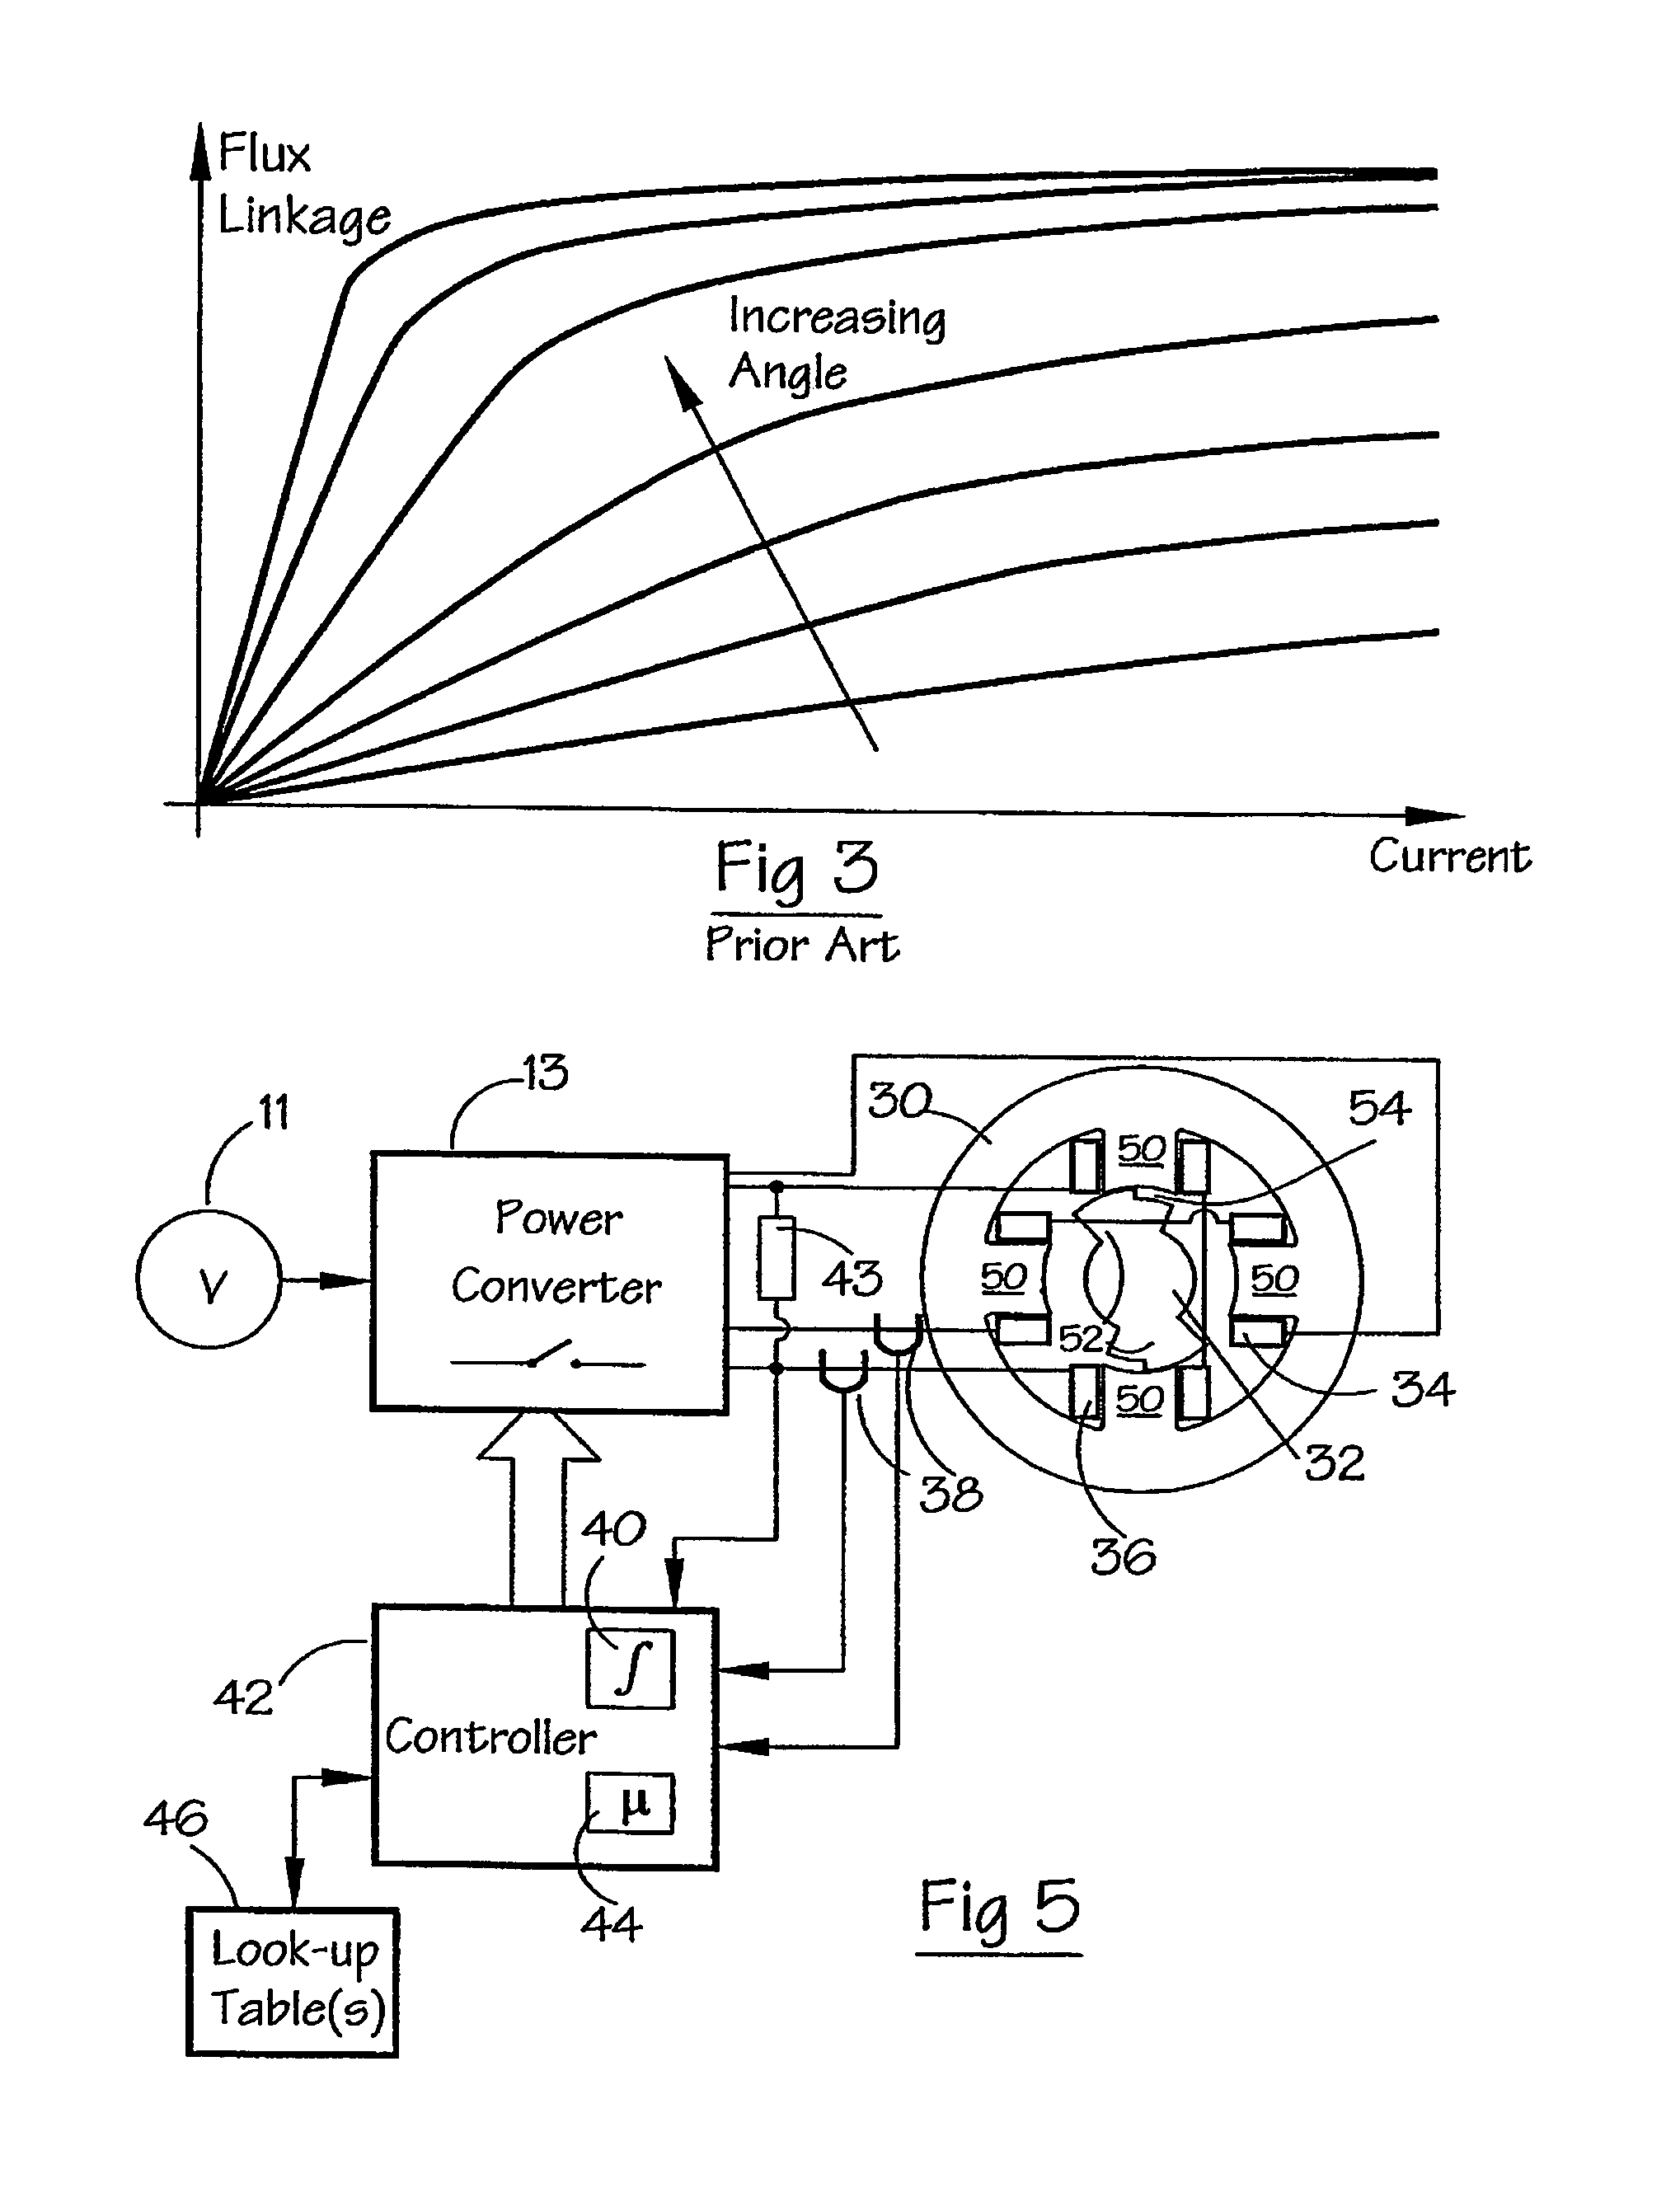 Rotor position detection of a switched reluctance drive